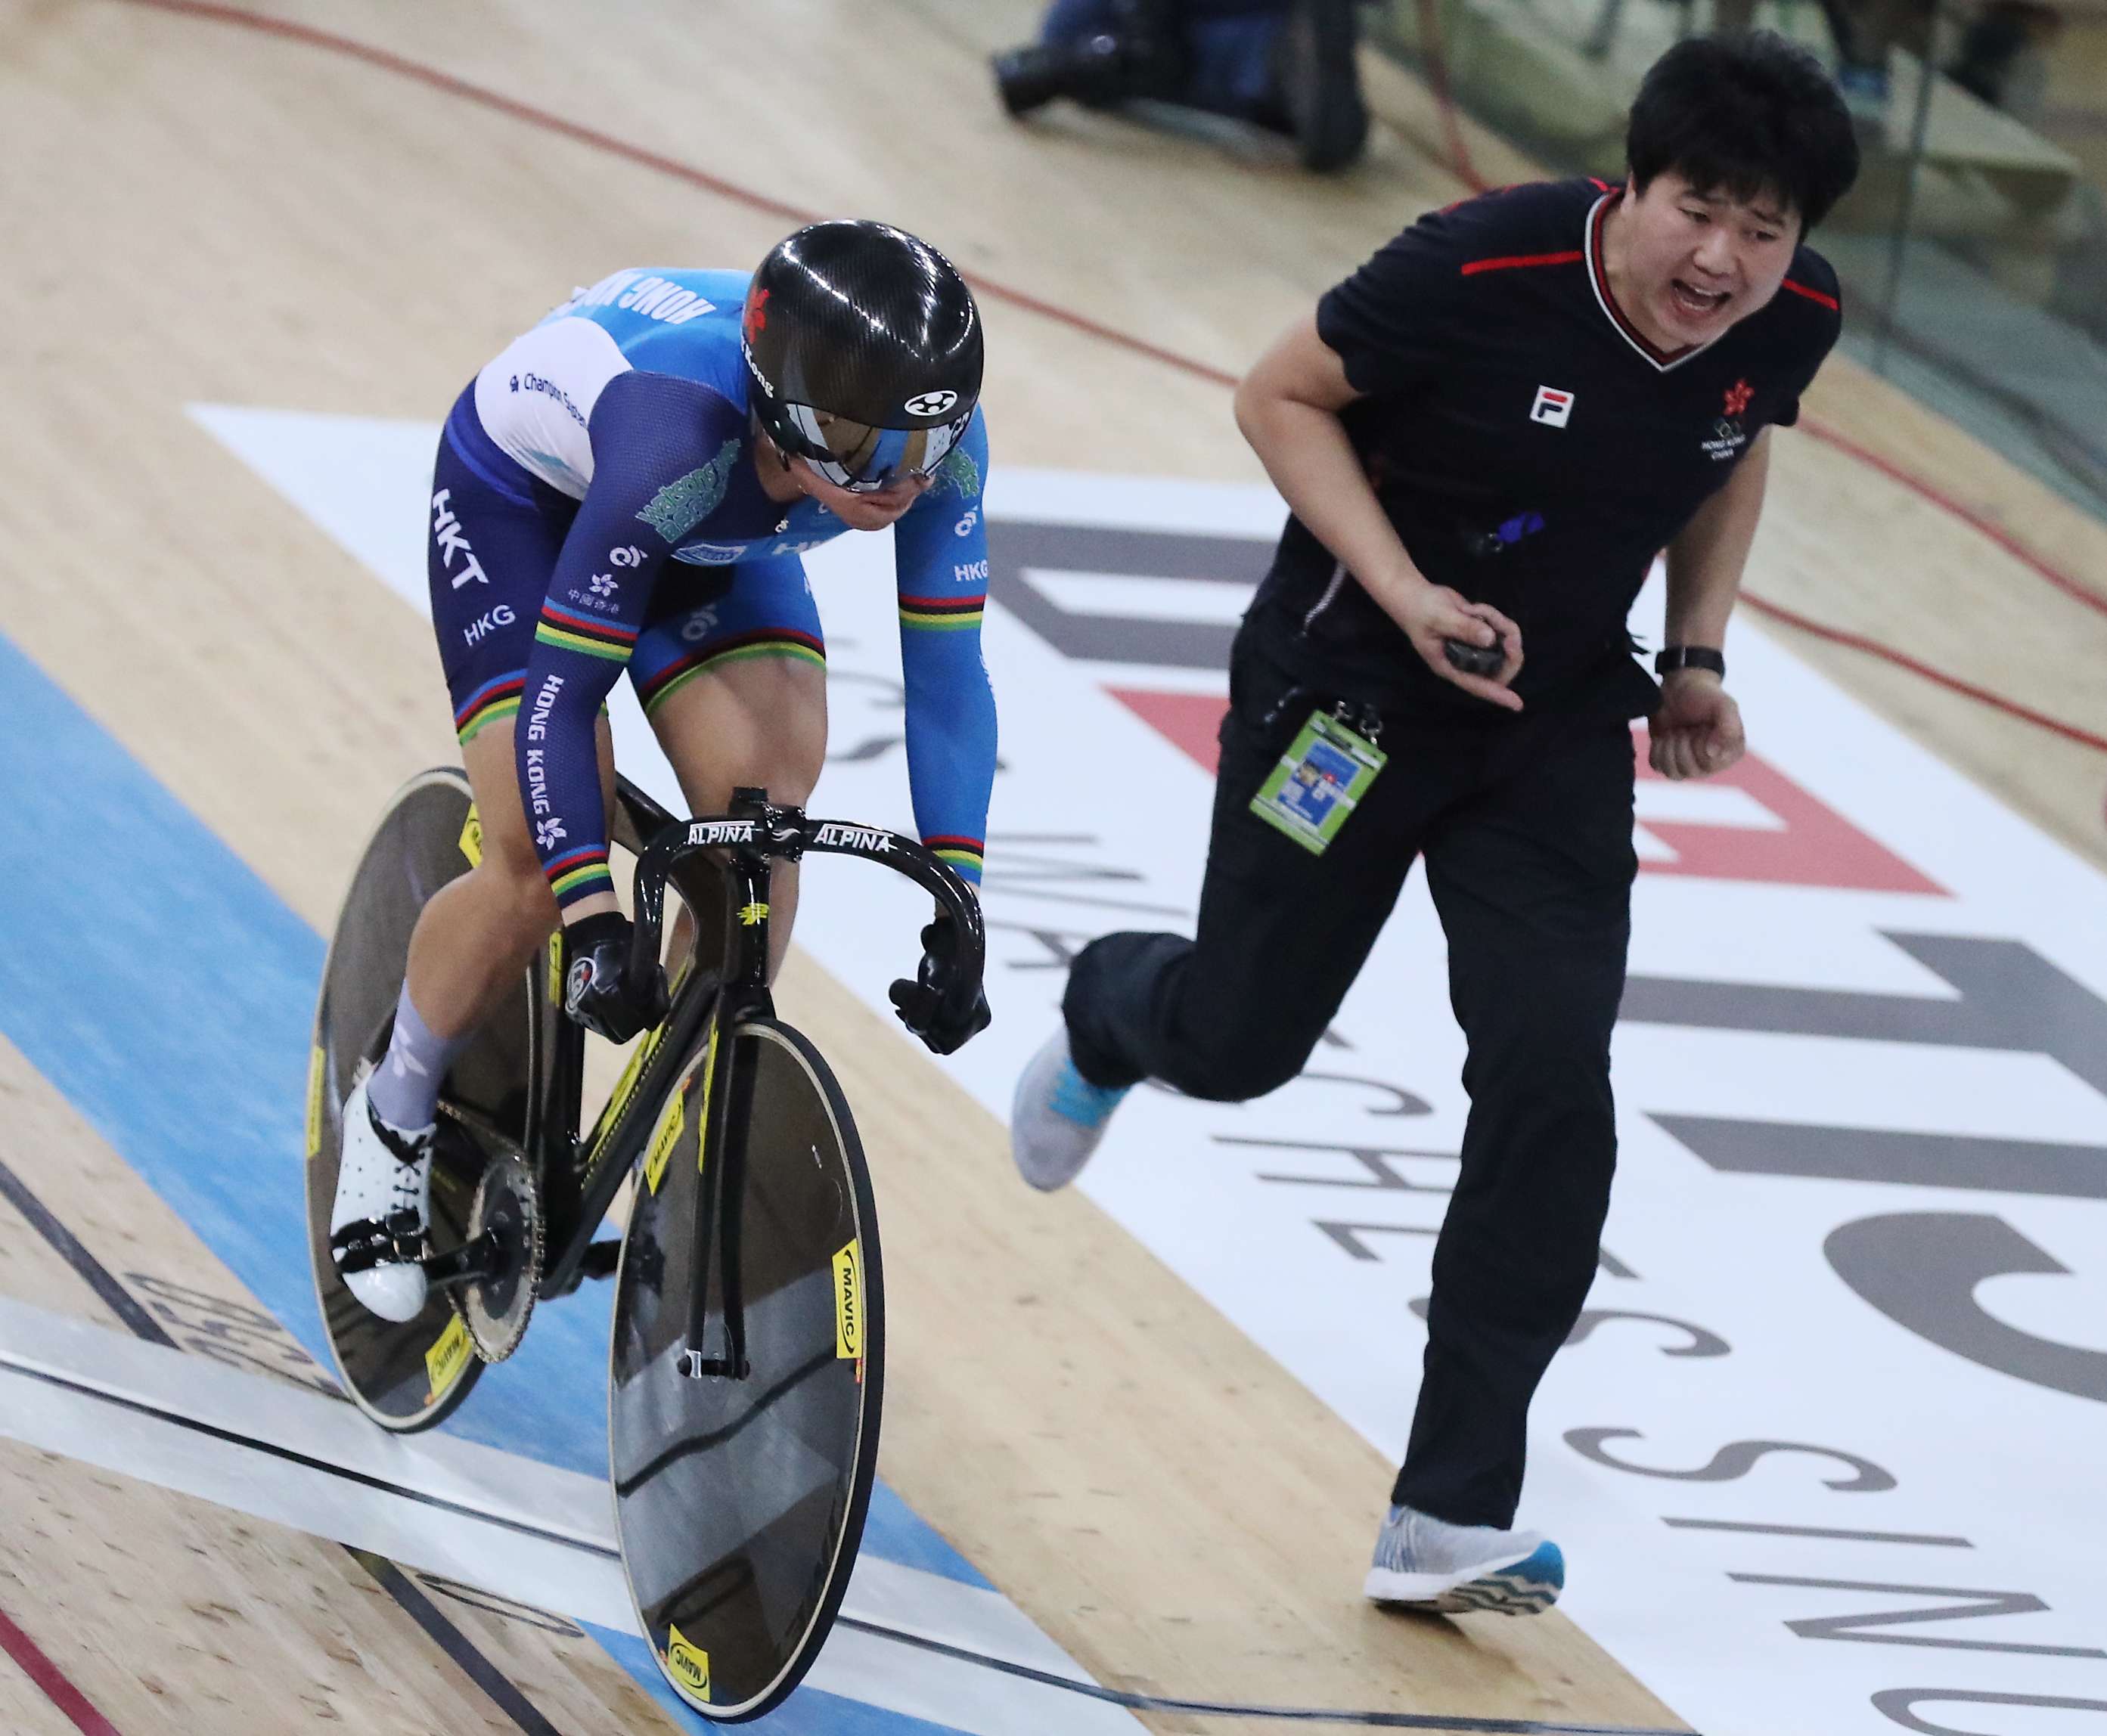 Hong Kong's Sarah Lee is encouraged by mechanic Li Linjie during the final lap of the women’s 500m time trial at Tseung Kwan O Velodrome on Saturday night. Photo: Edward Wong